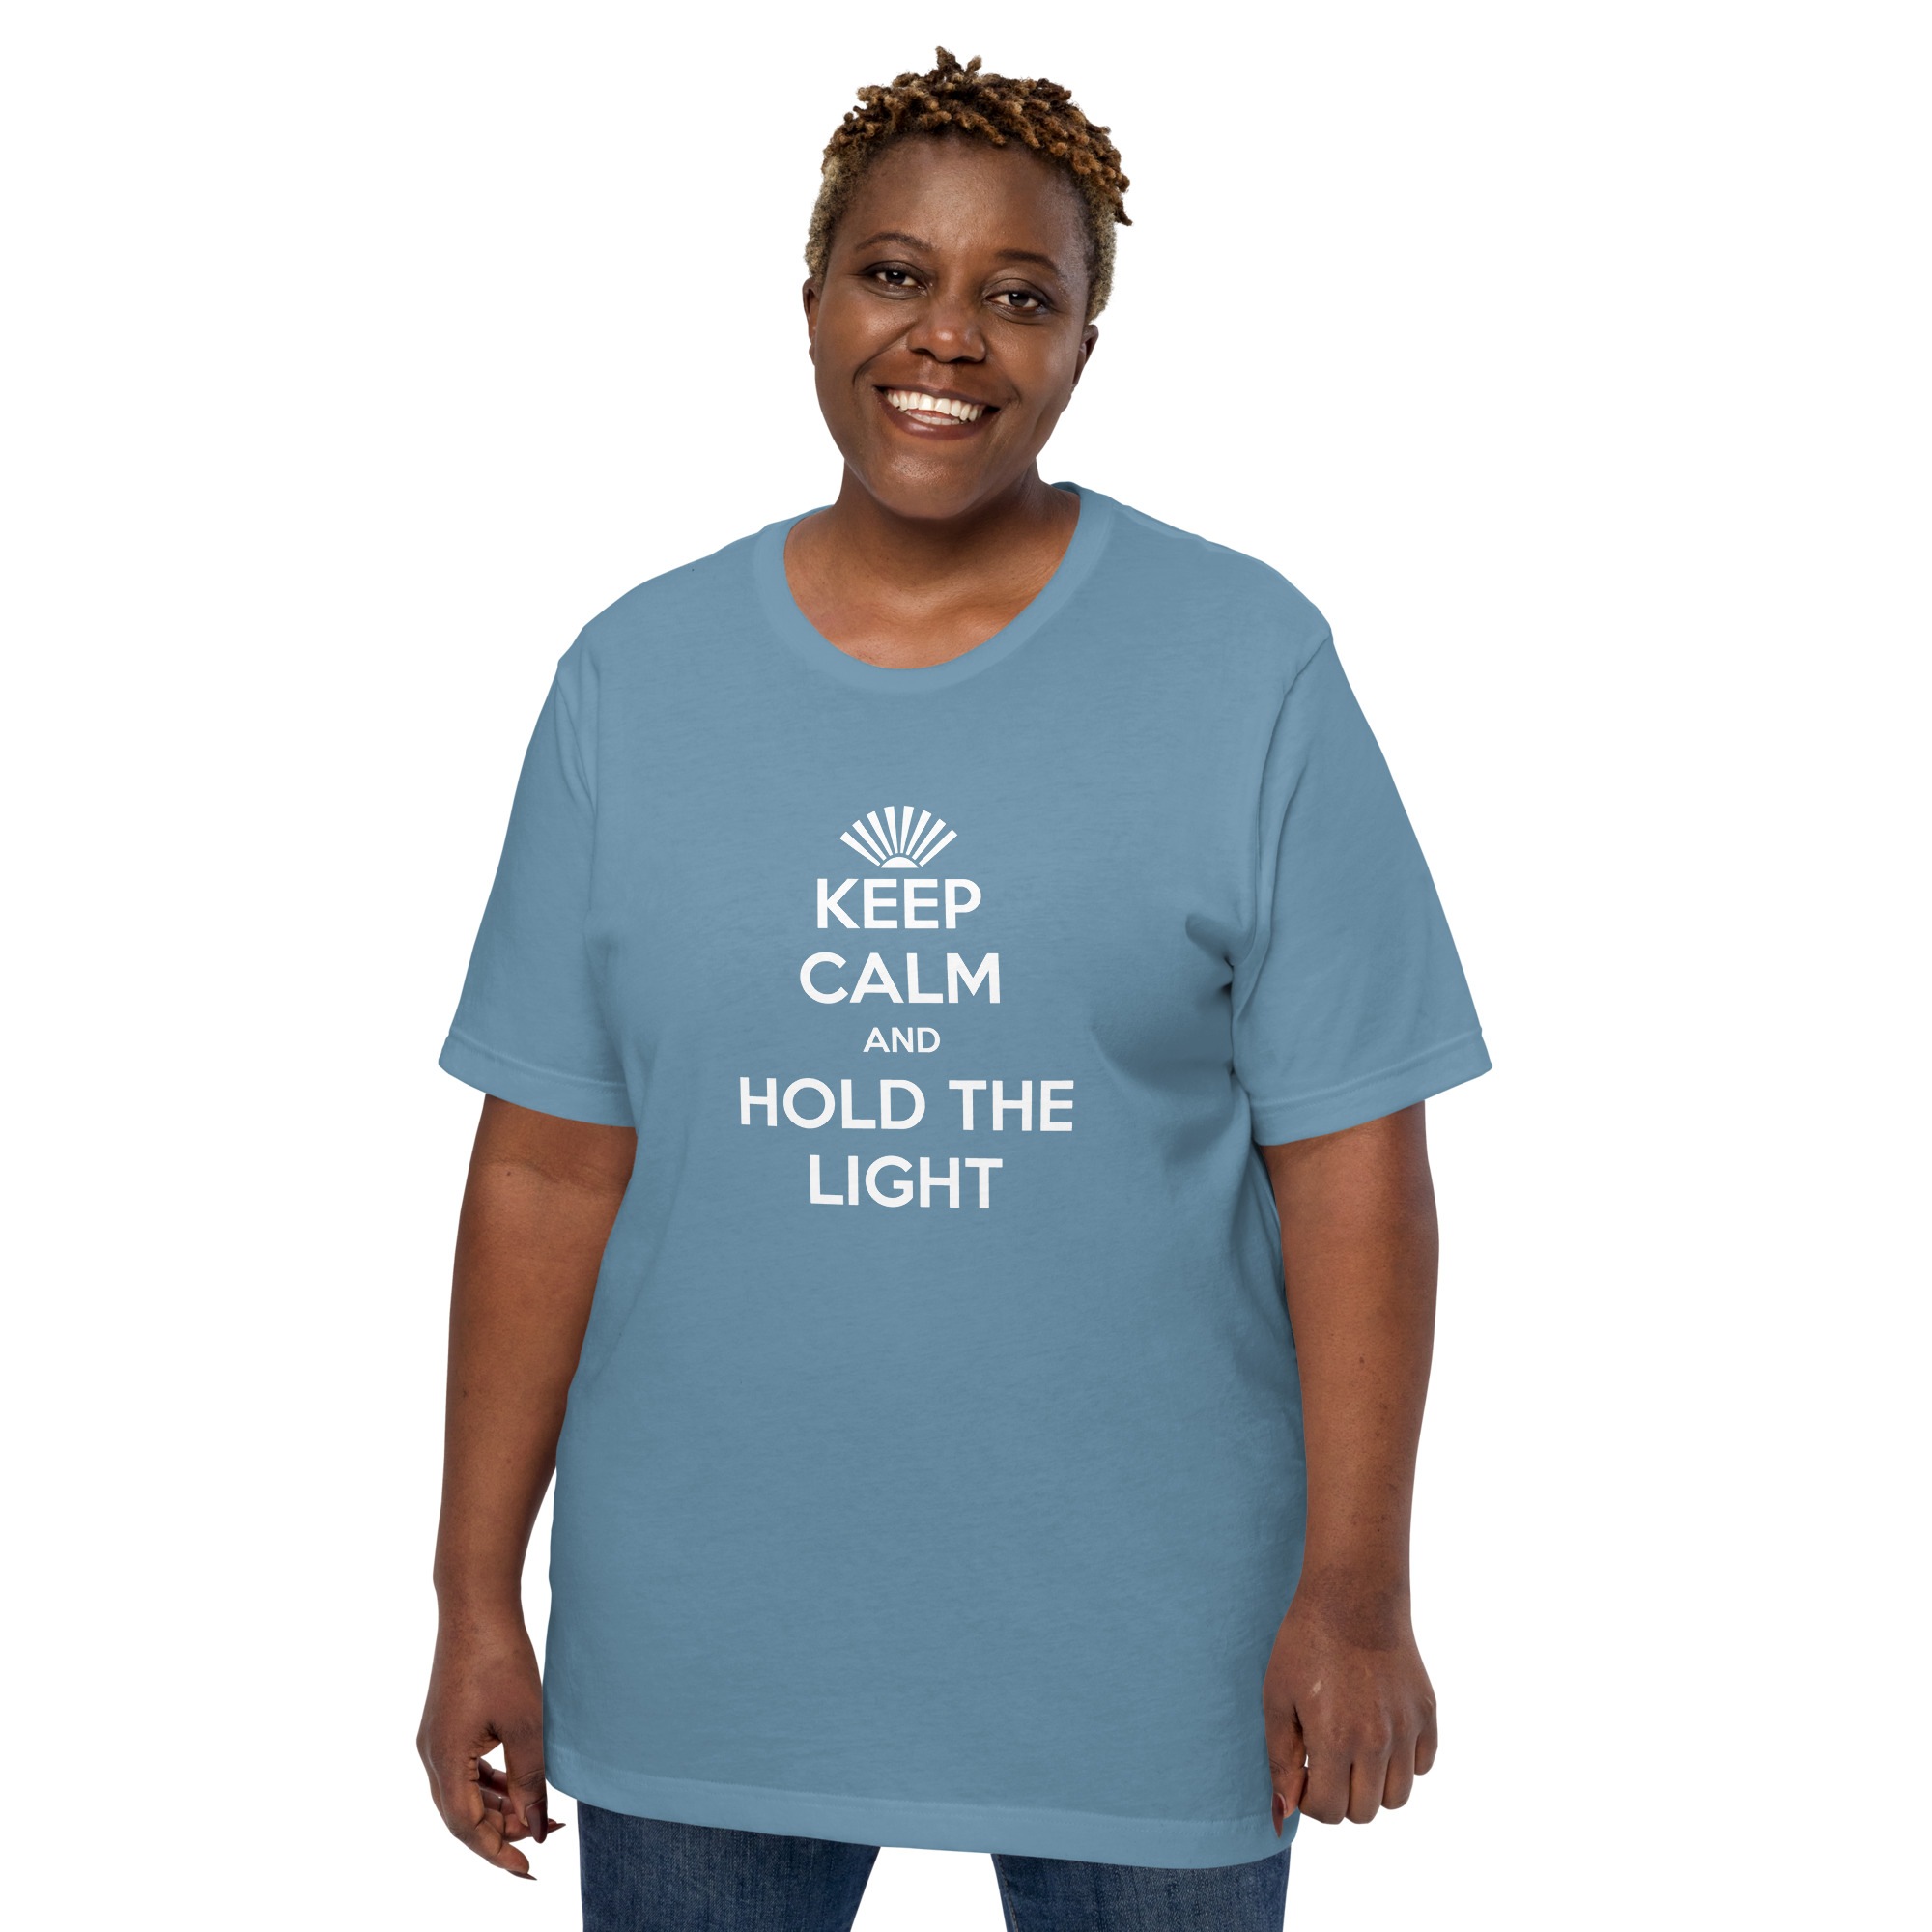 Keep Calm and Hold the Light Tshirt